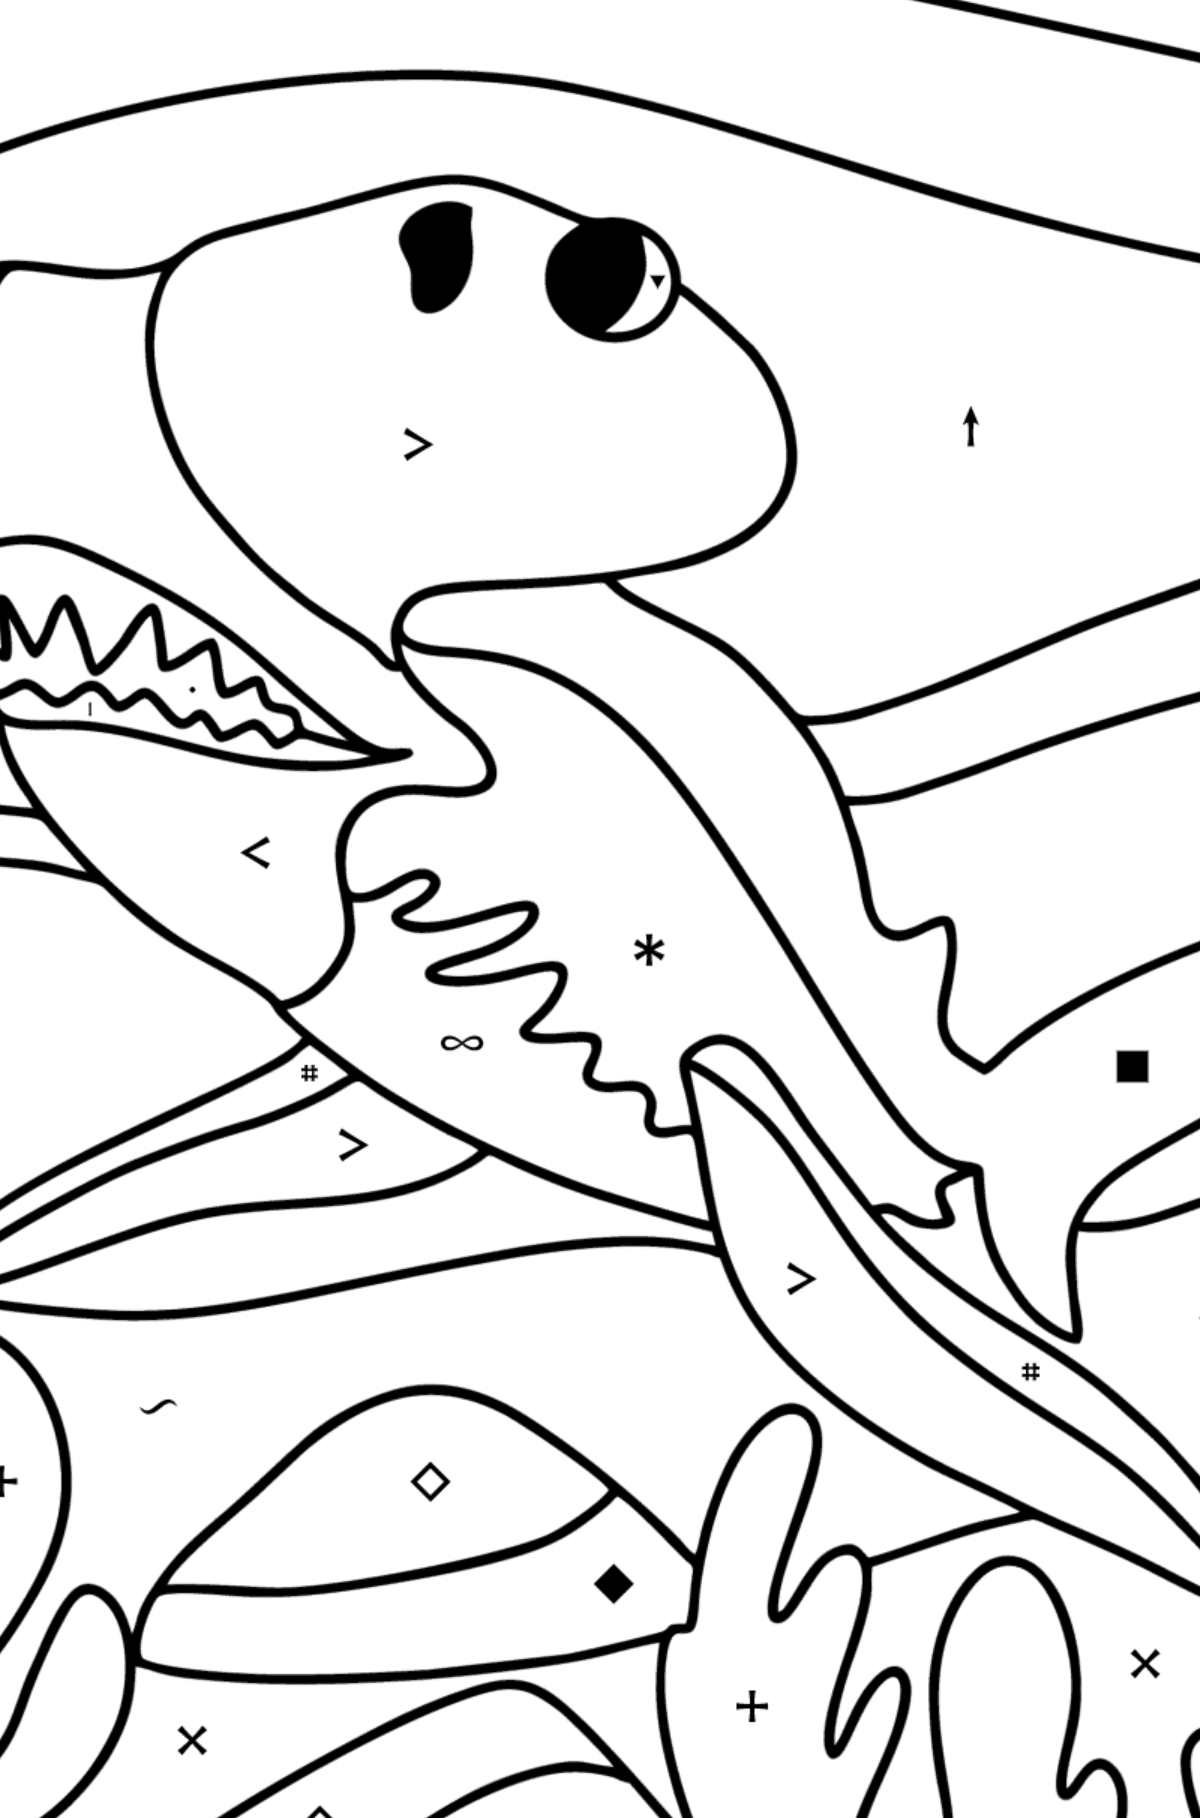 Hammerhead shark coloring page - Coloring by Symbols for Kids